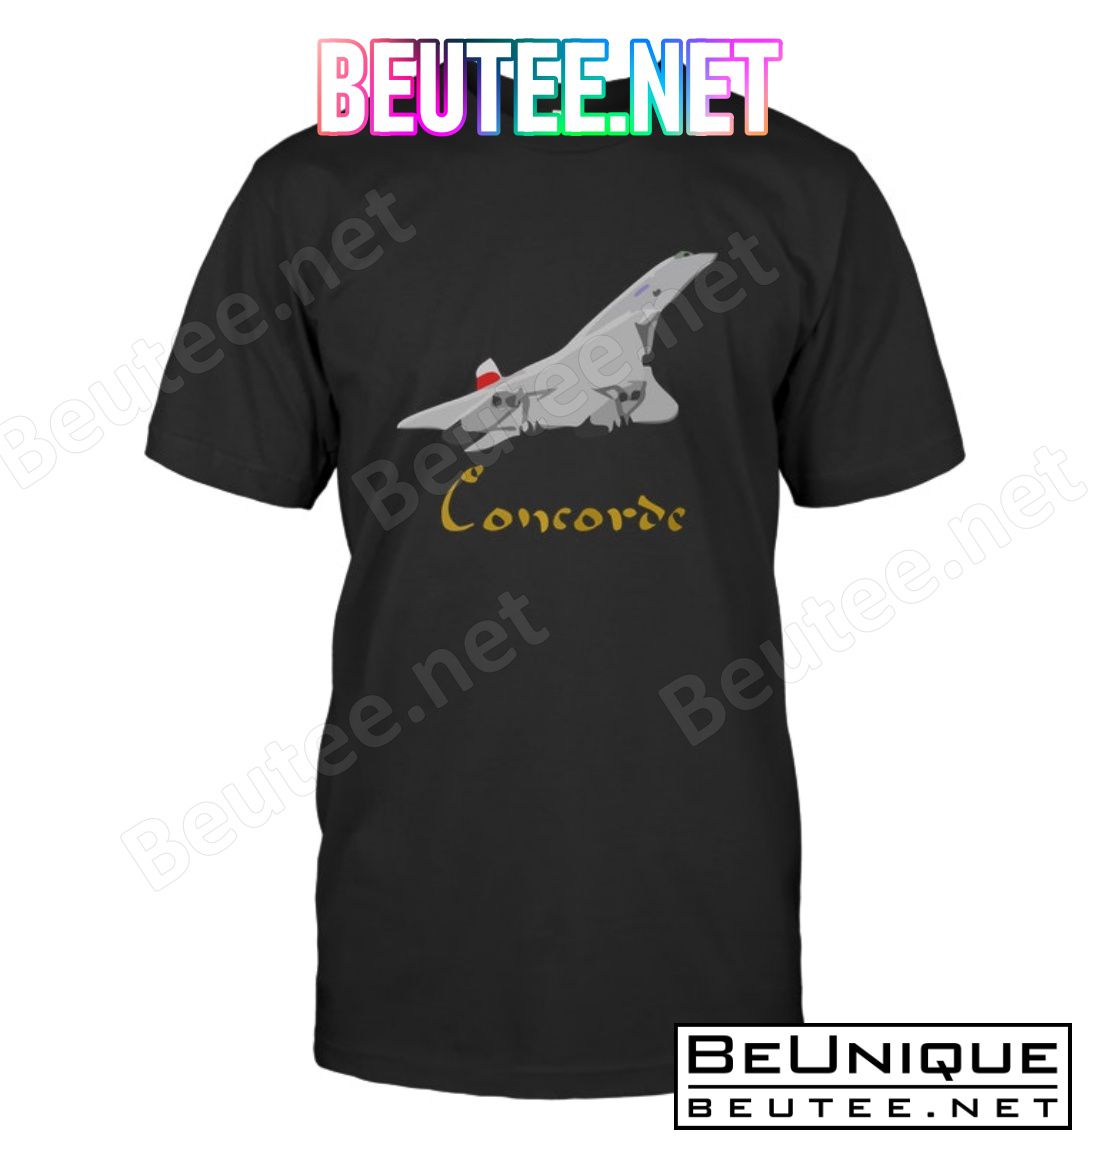 Concorde Art Text And Plane Shirt